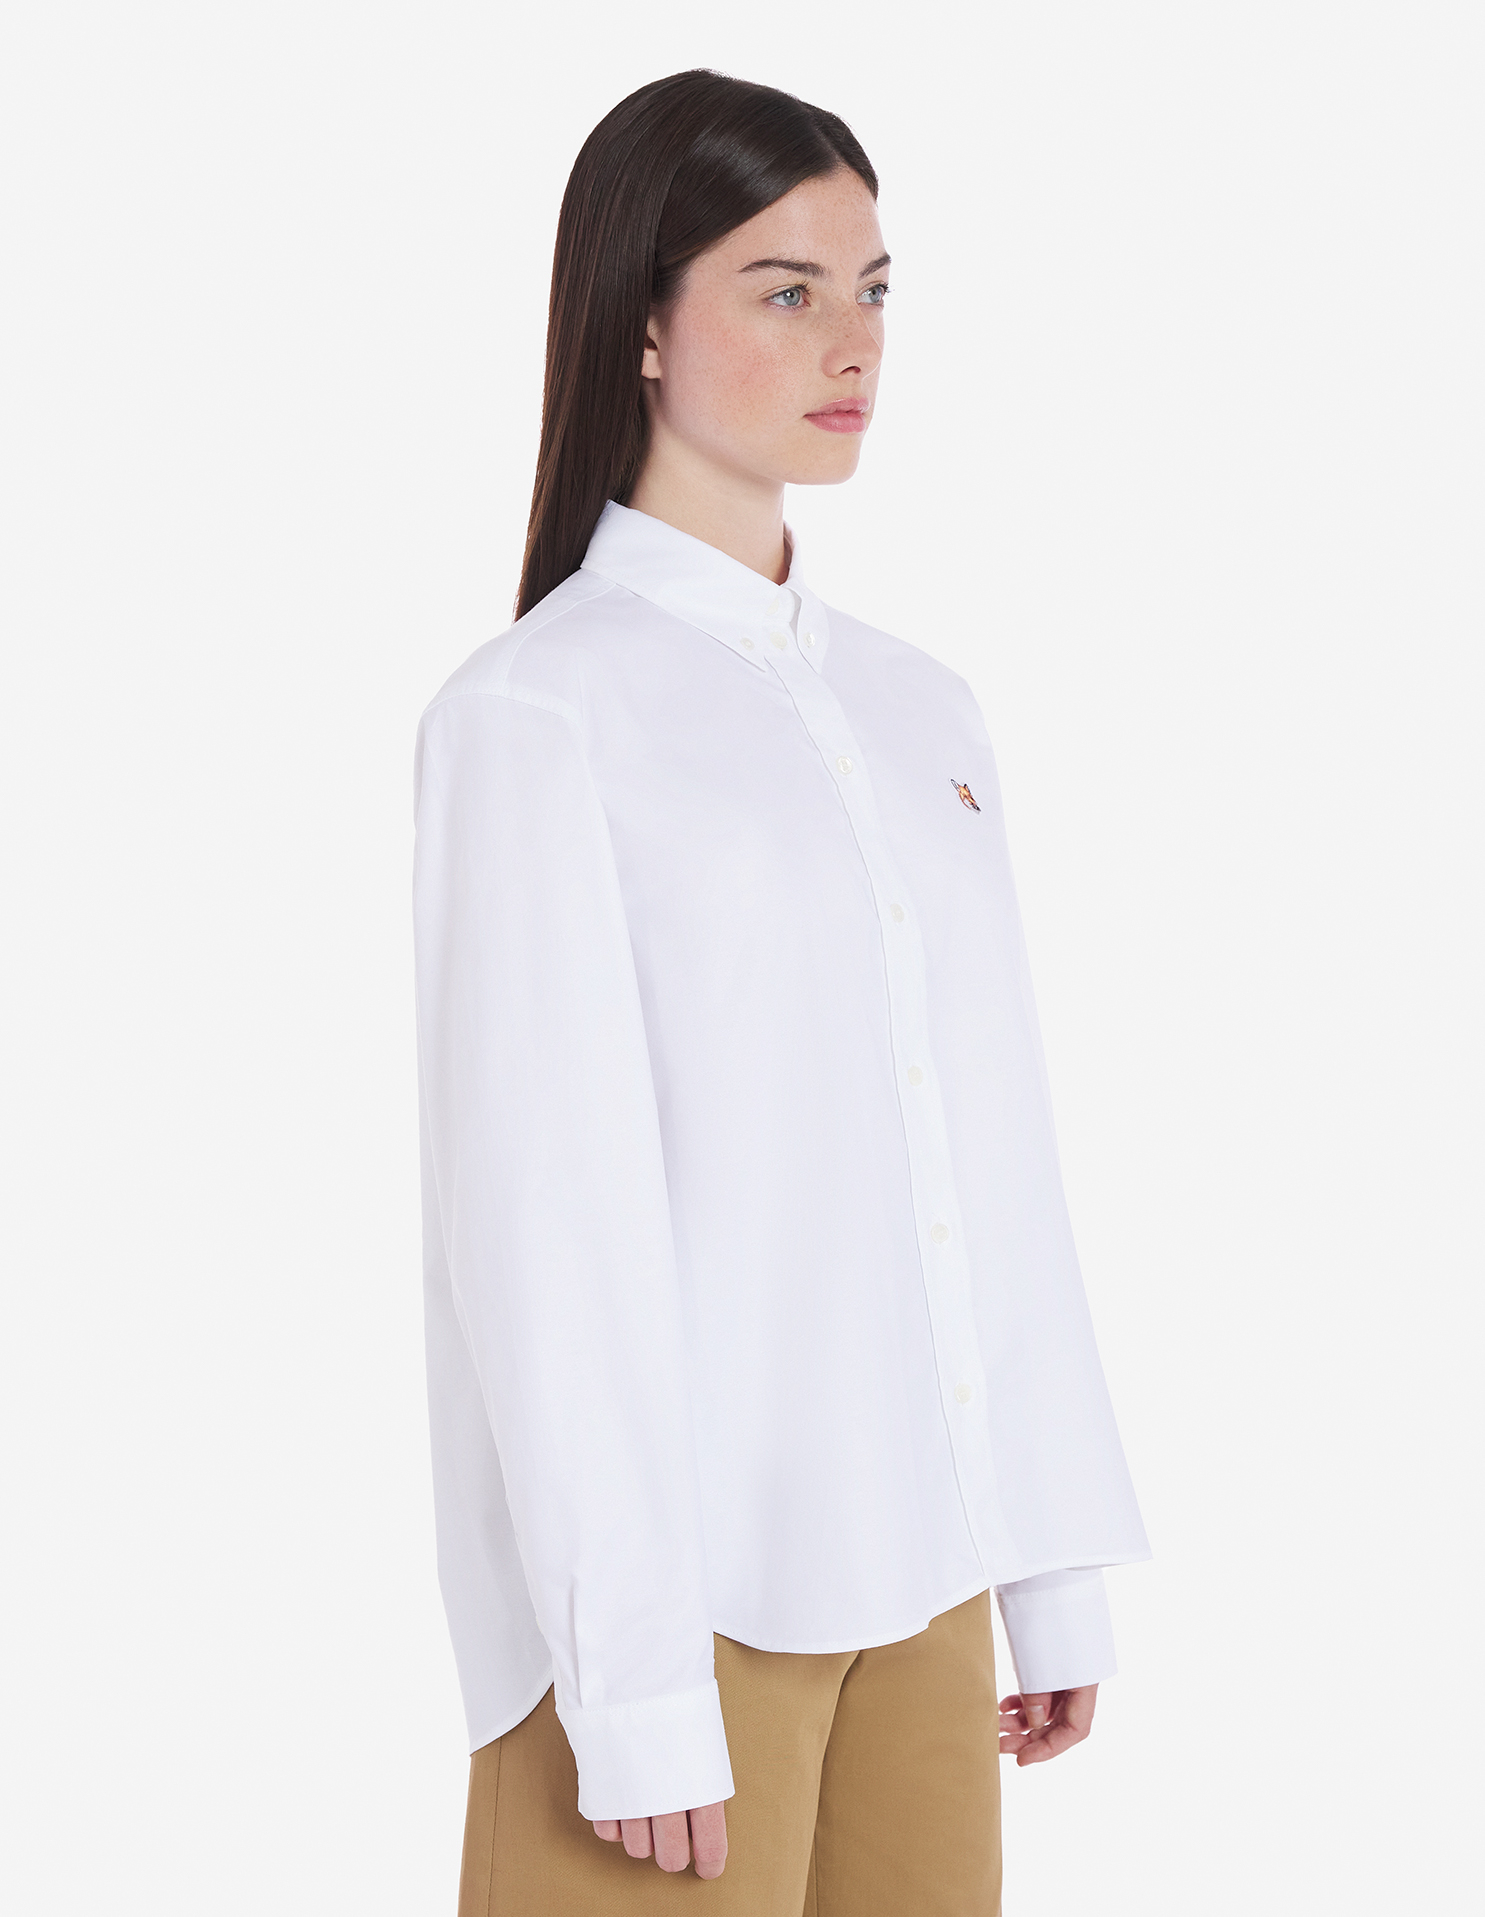 BUTTON-DOWN CLASSIC SHIRT WITH INSTITUTIONAL FOX HEAD PATCH IN